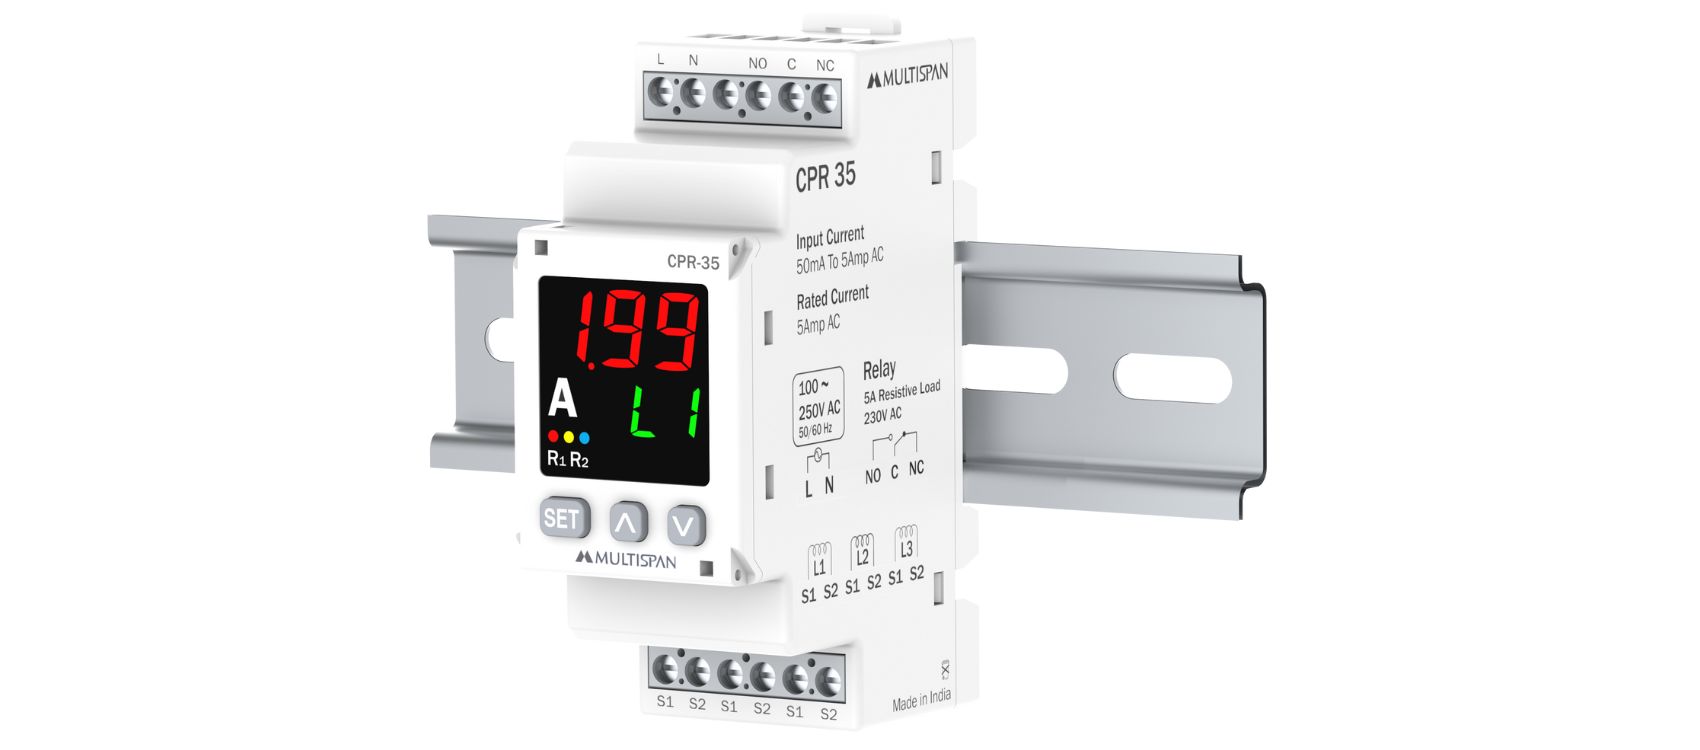 CPR-35 DIN Rail with Display - product image